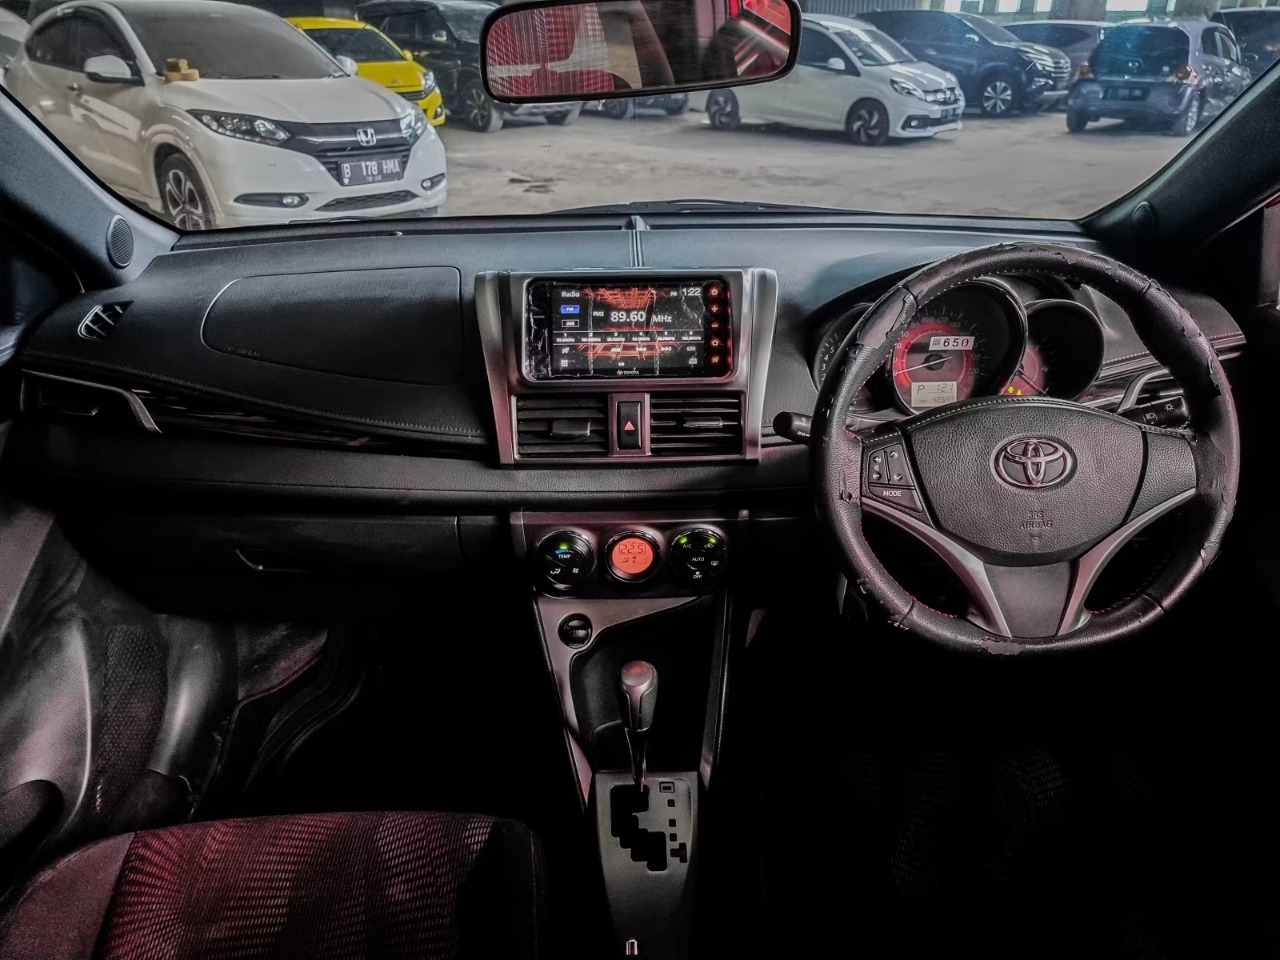 TOYOTA YARIS 1.5L S TRD HEYKERS AT 2017